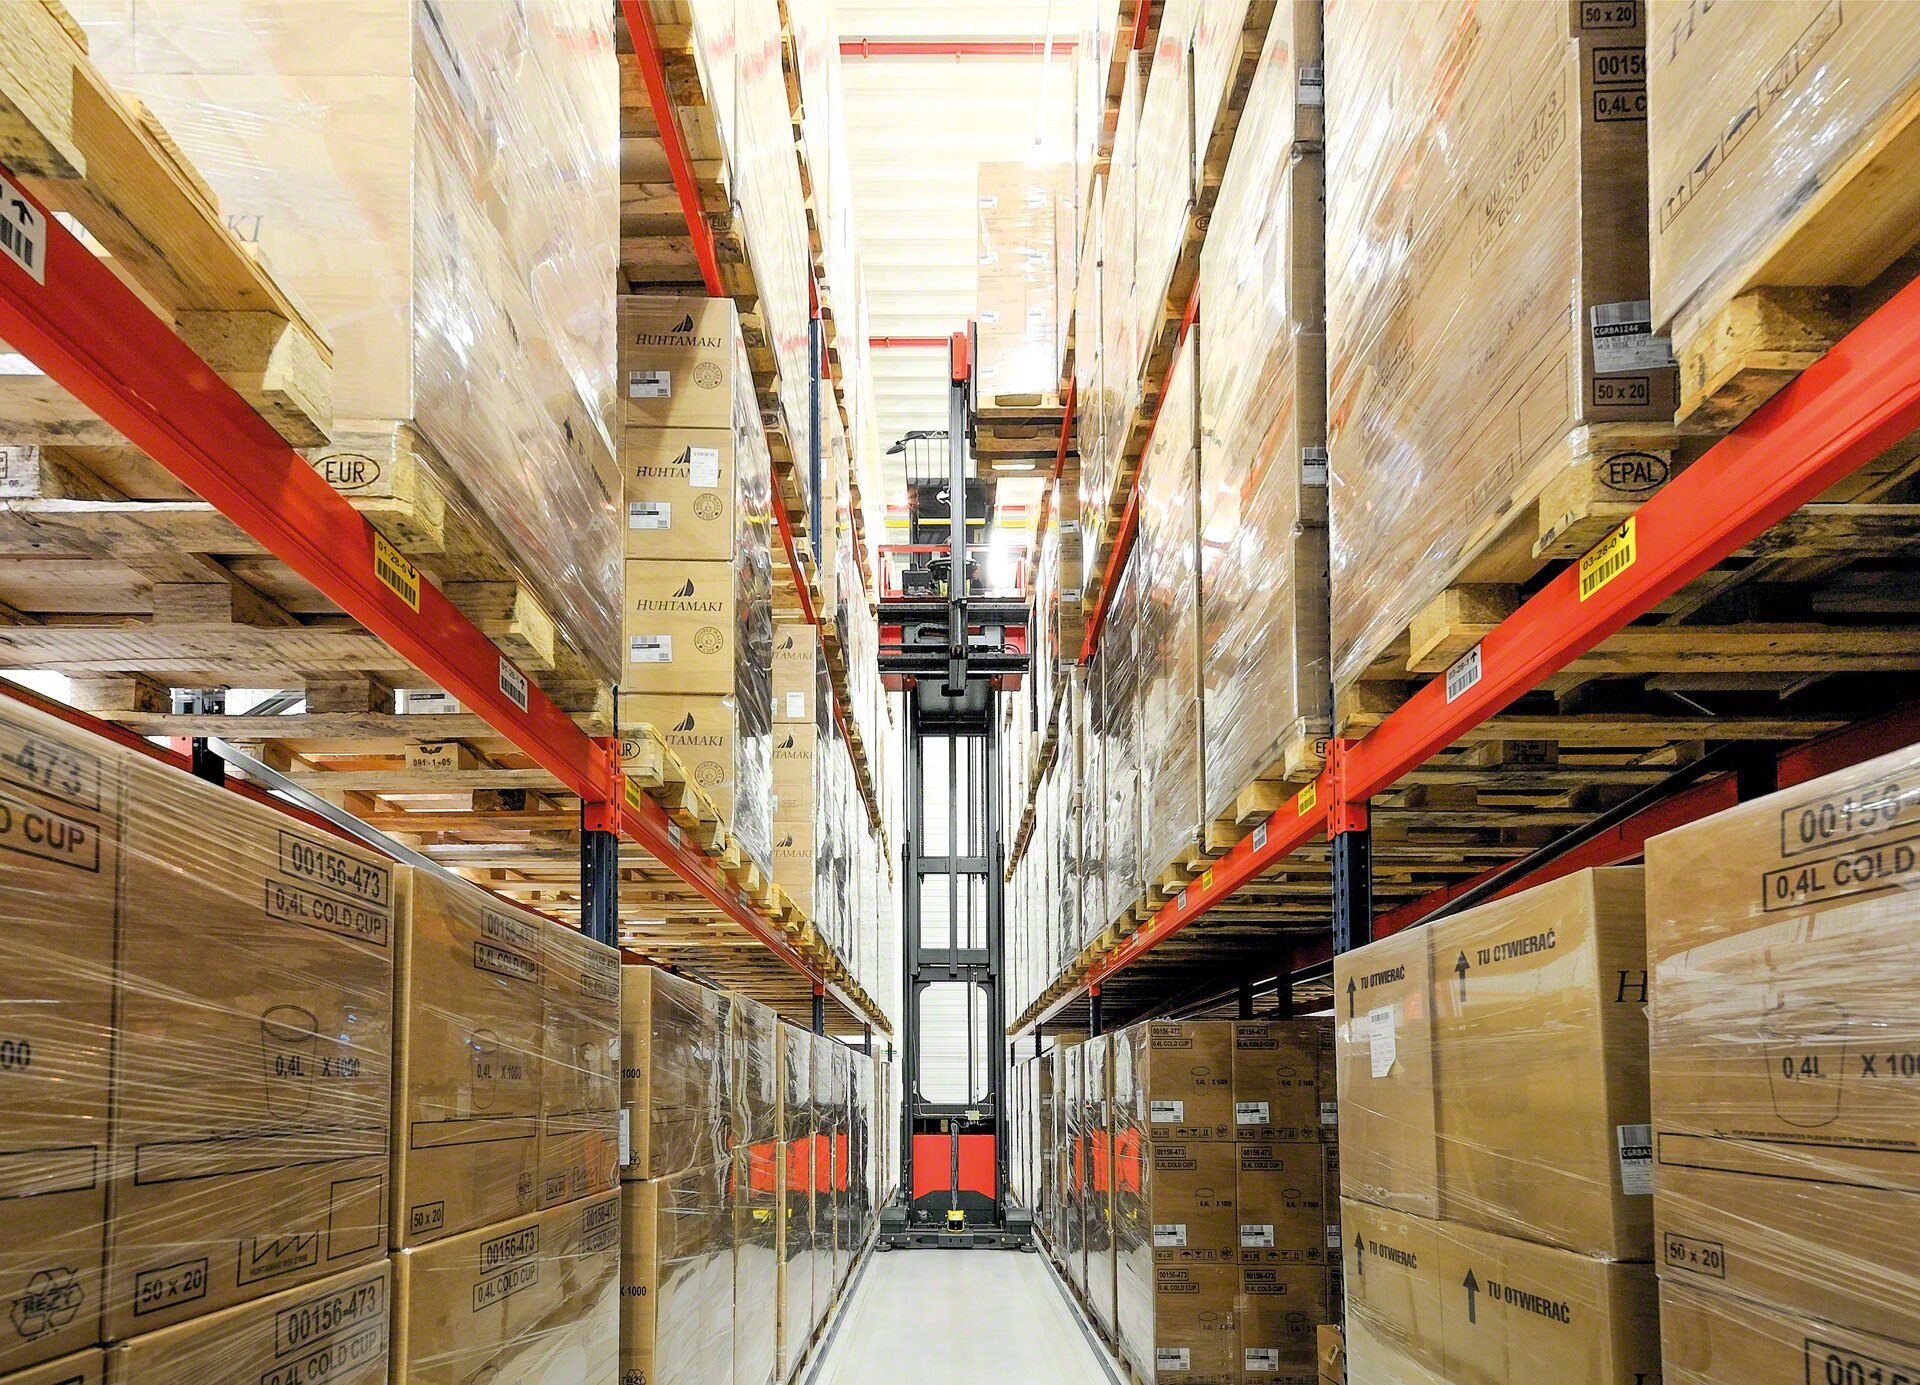 Order pickers operating in a narrow pallet rack aisle